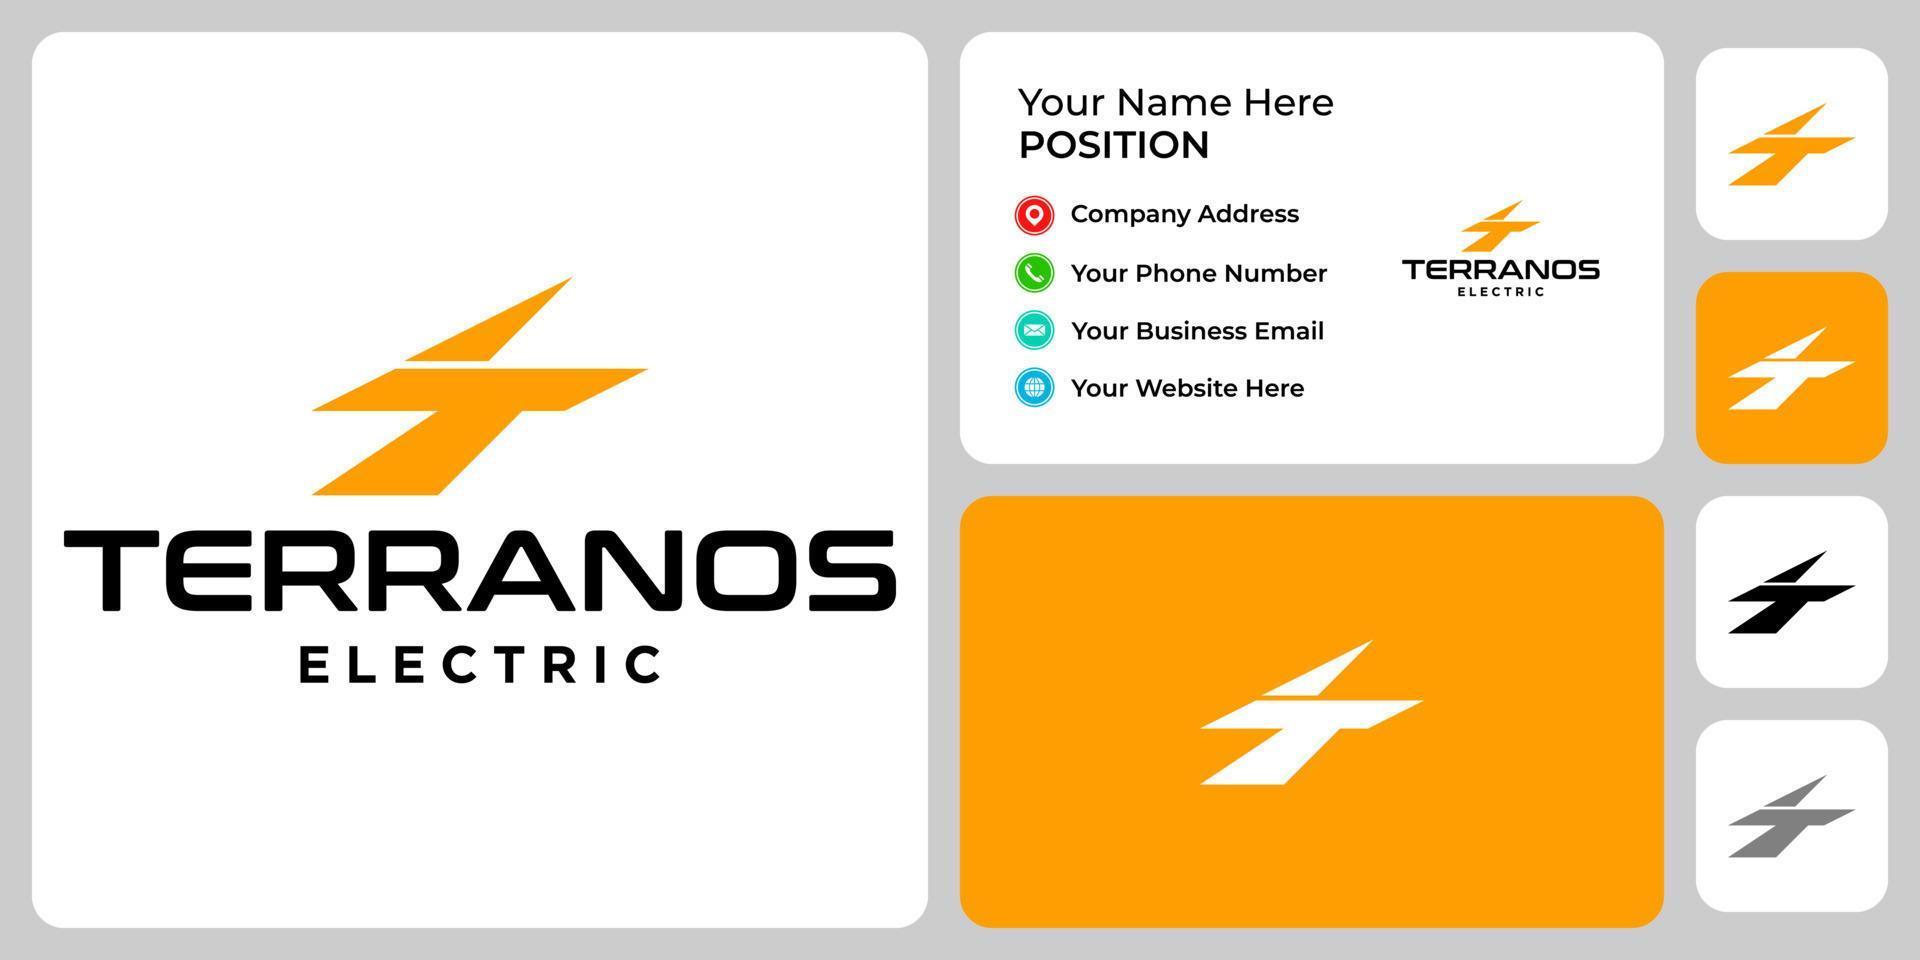 Letter T monogram electric power logo design with business card template. vector